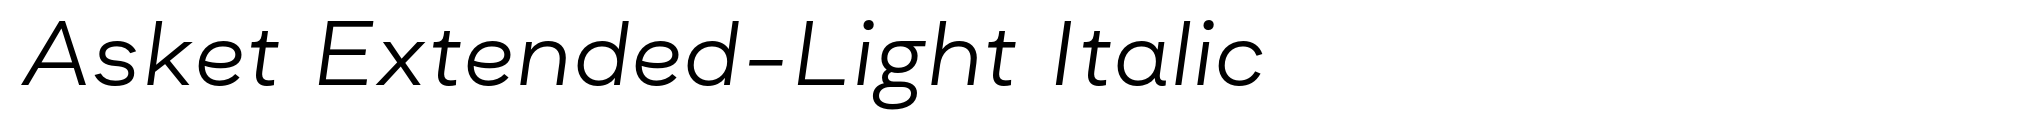 Asket Extended-Light Italic image